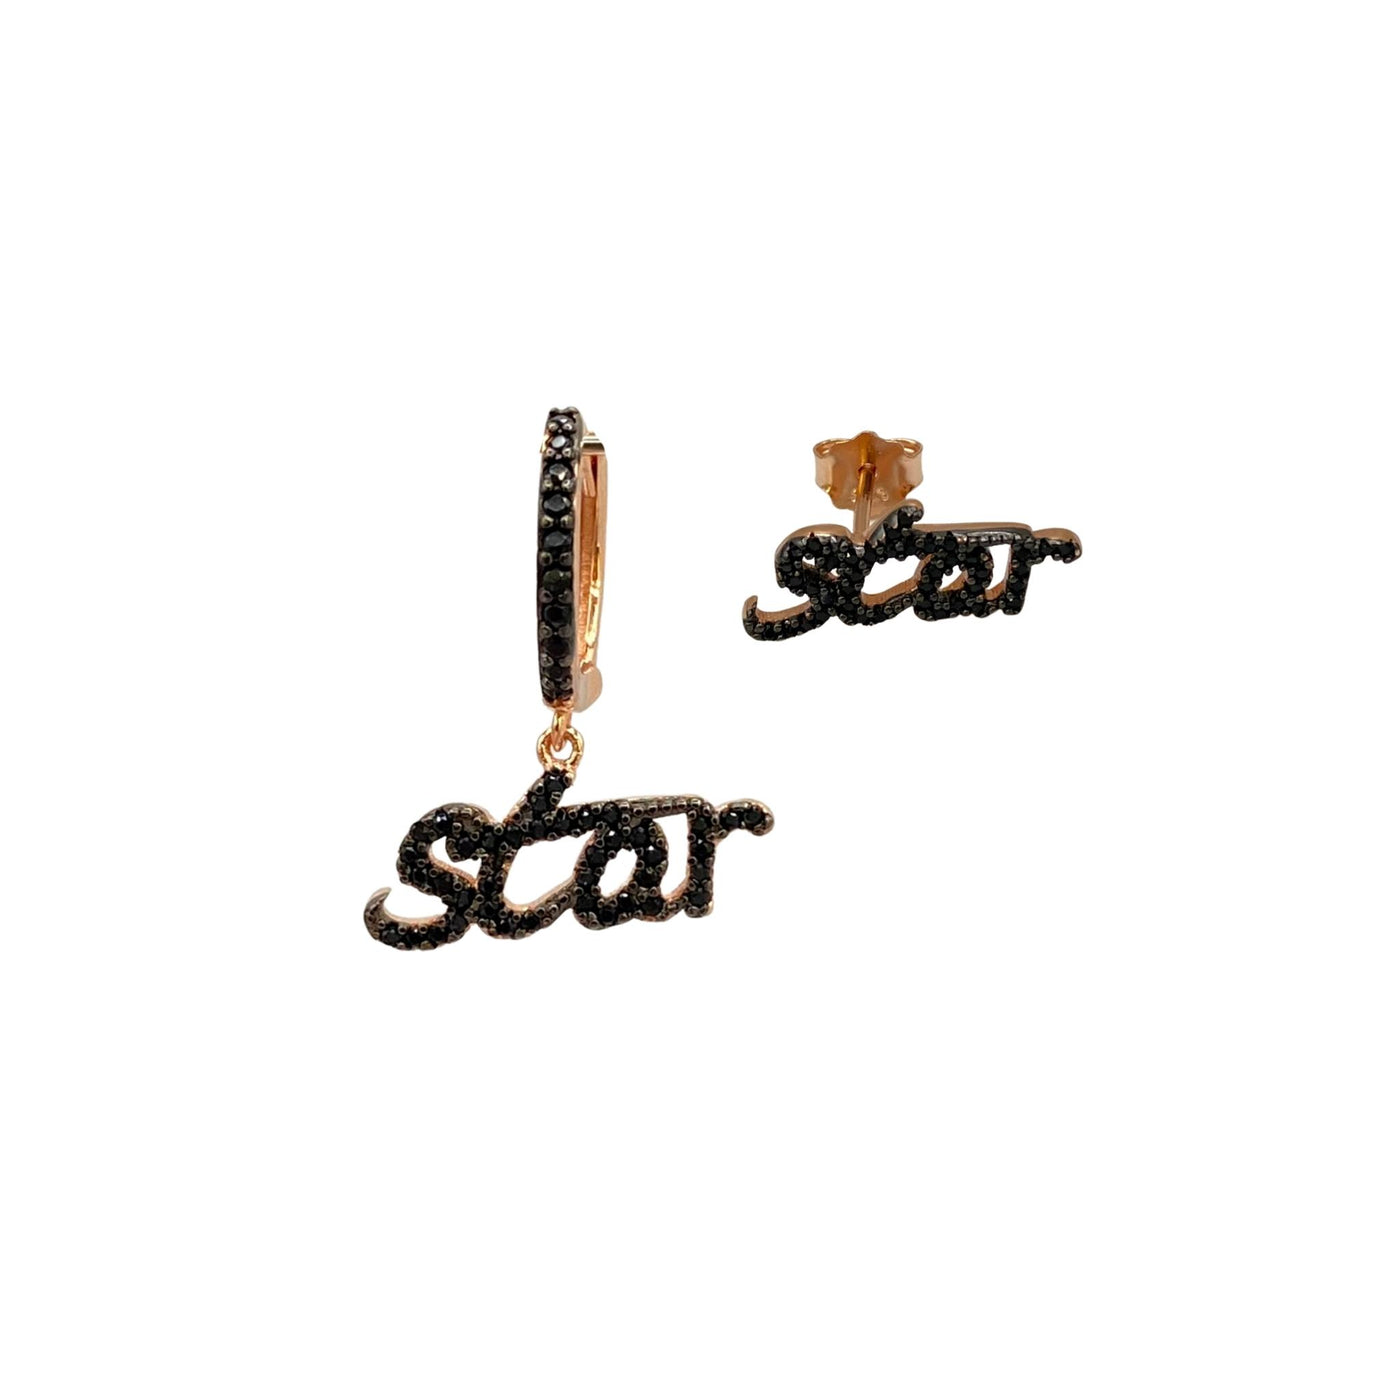 Silver earrings with star charm